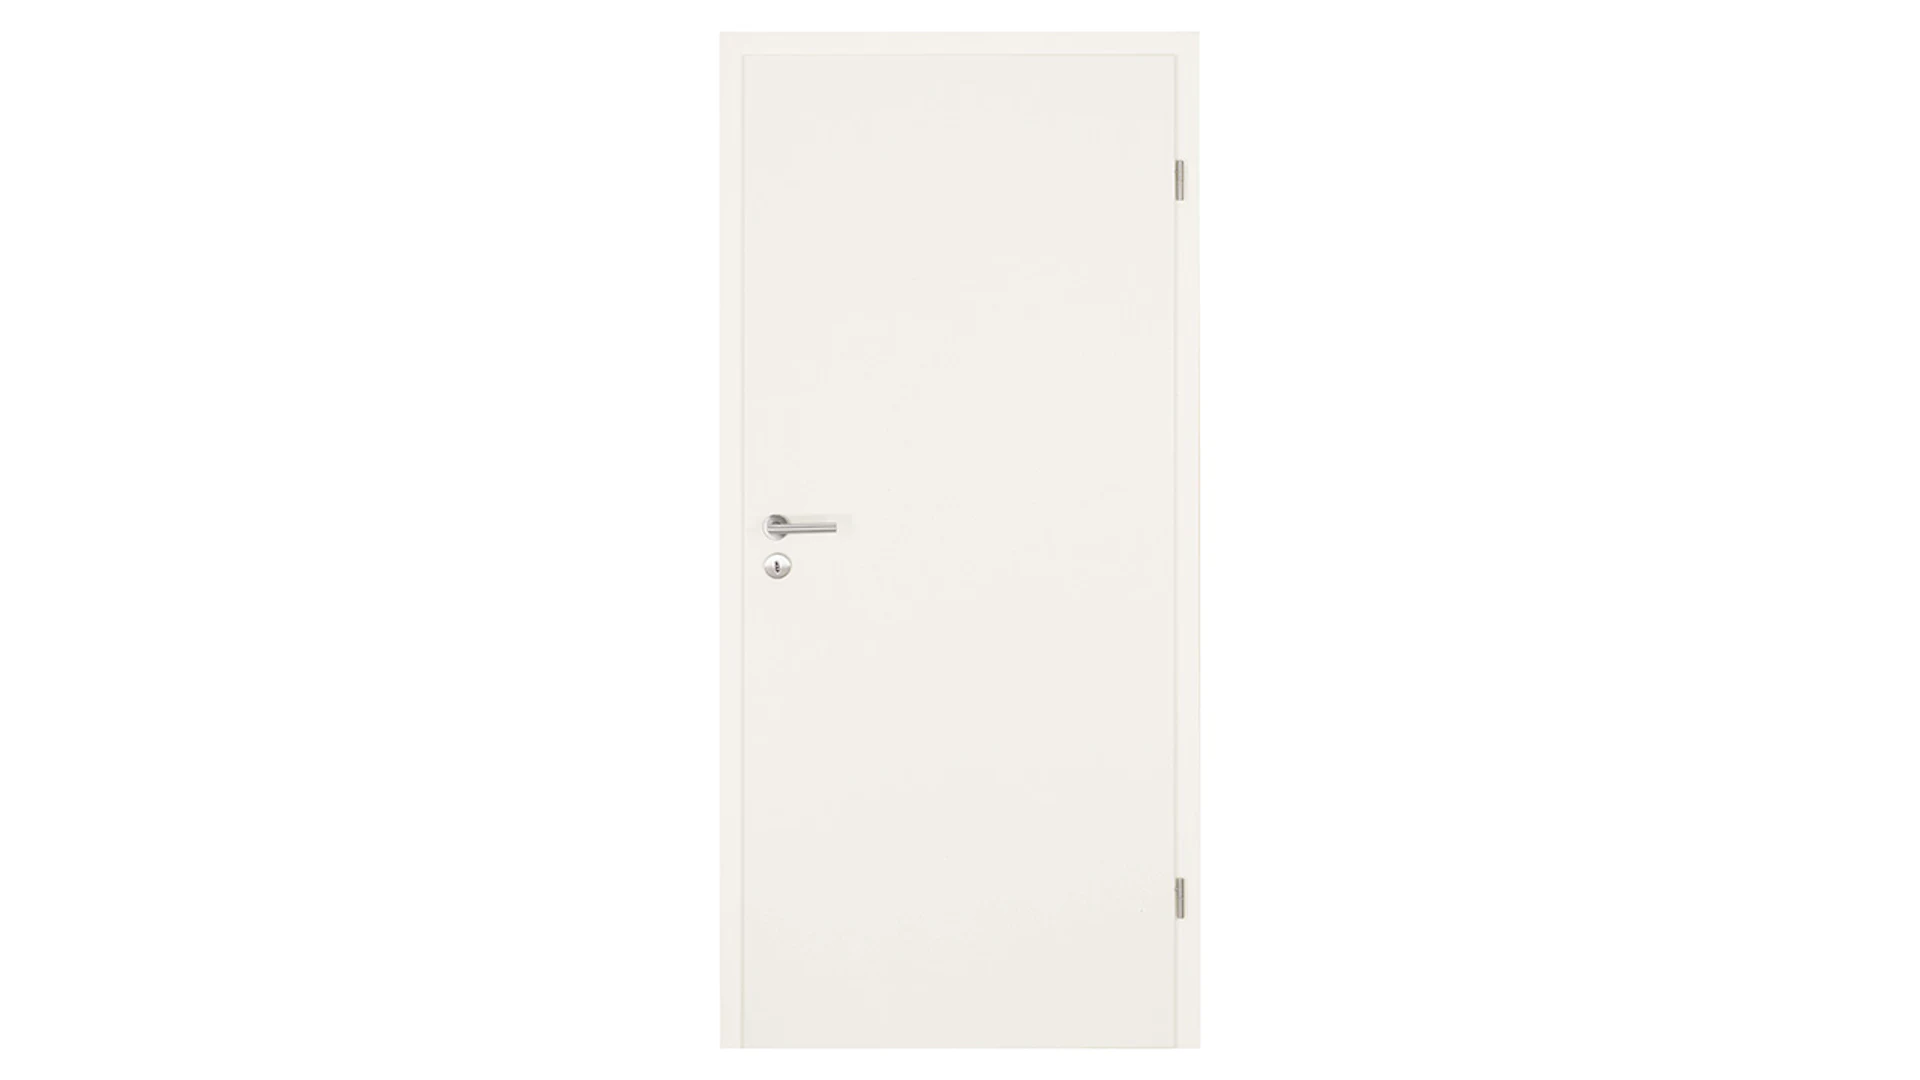 planeo CPL interior door CPL 1.0 - Frieso Pearl white 2110 x 860 mm DIN R - Round RSP Hinge 2-t